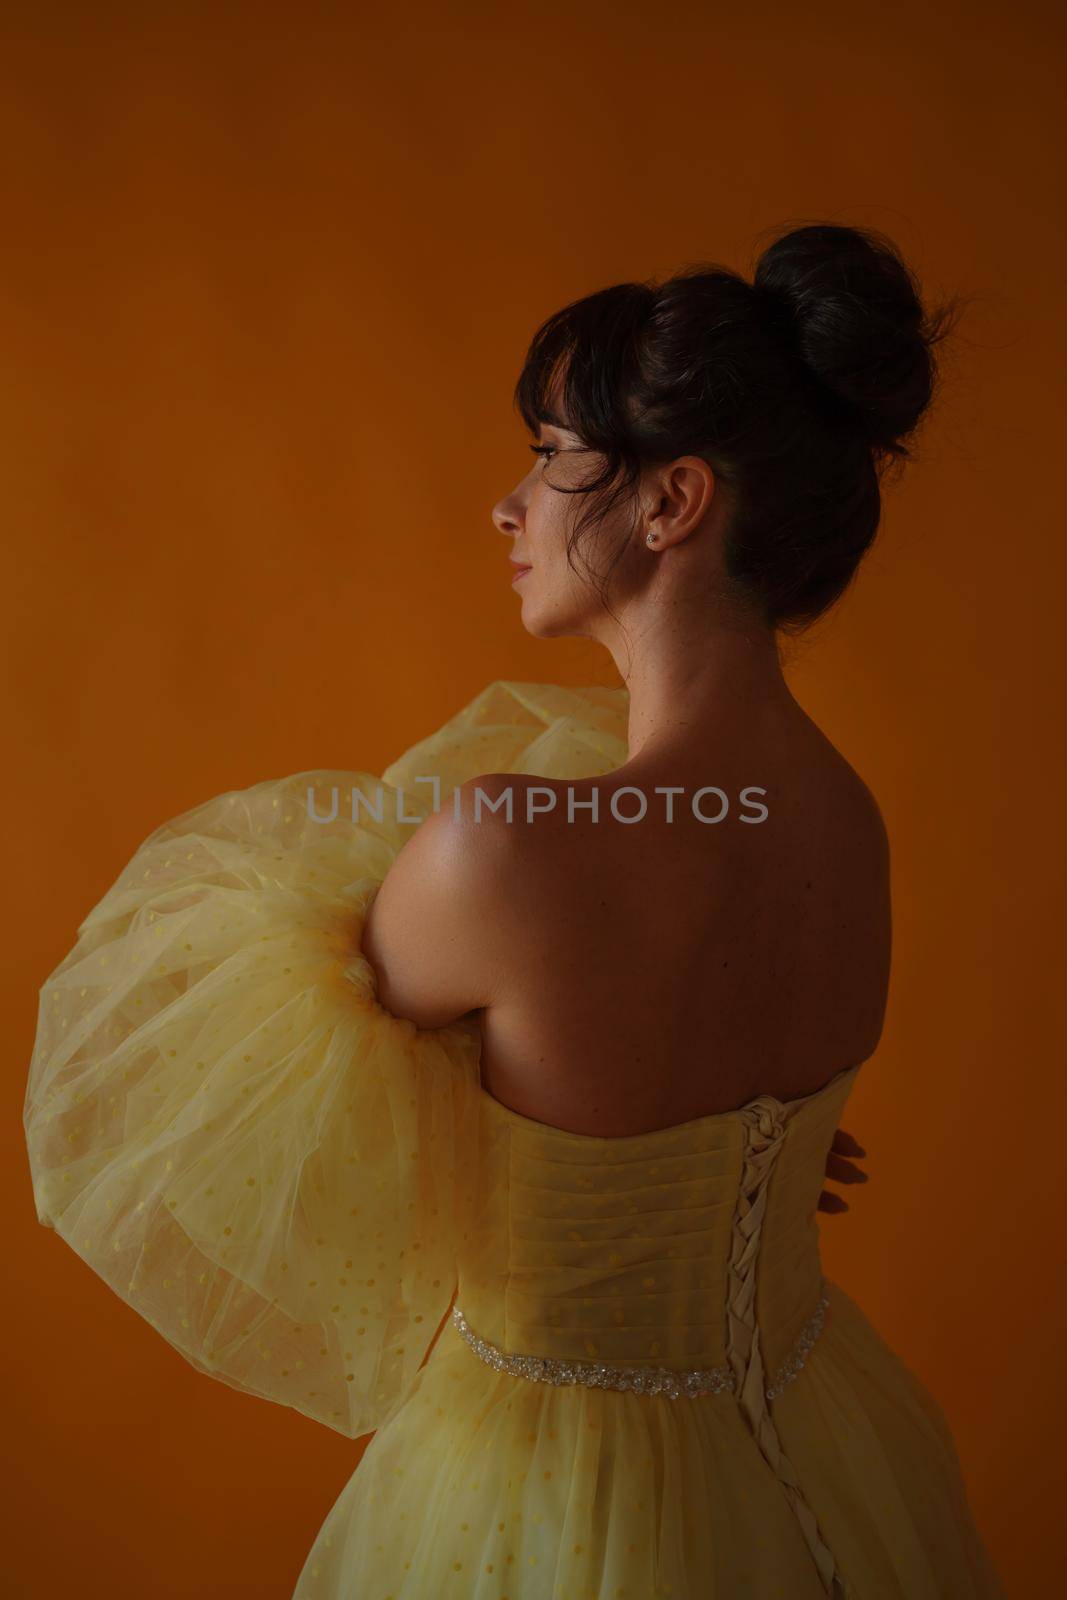 Profile portrait of a beautiful middle-aged woman in a yellow dress, her hair pulled up against a yellow background by Matiunina